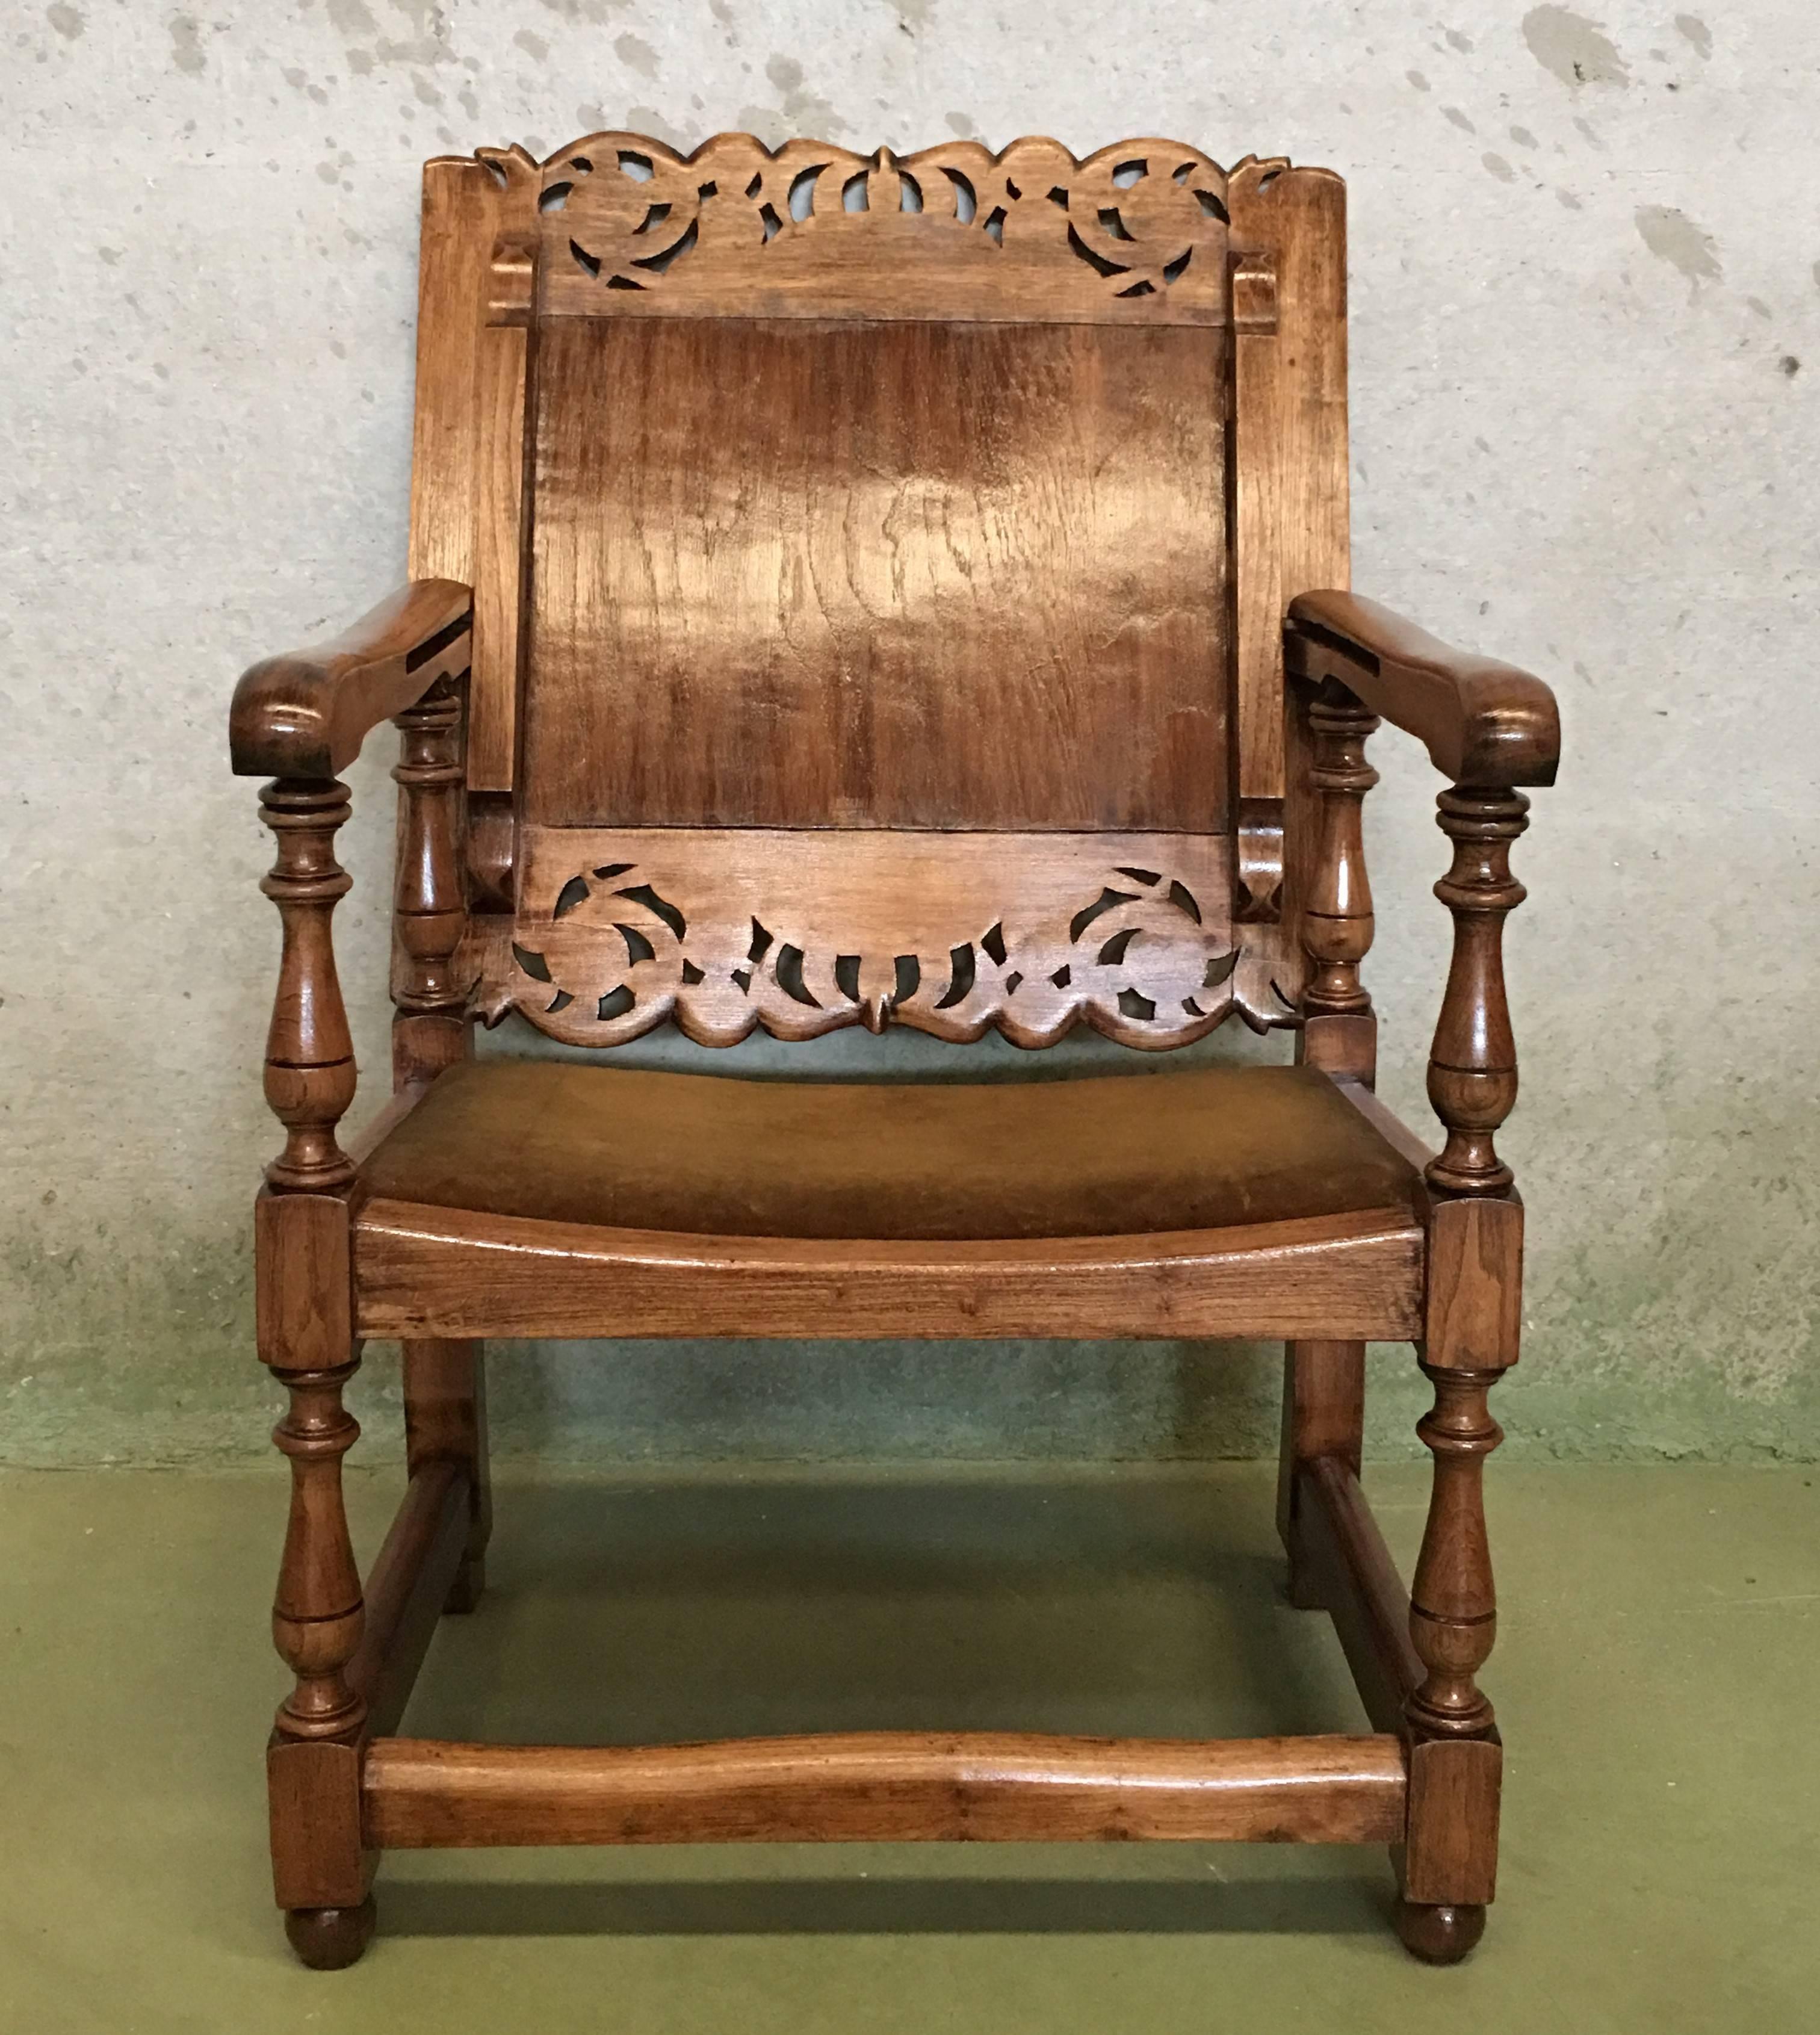 Velvet 19th Century Convertible Monk's Chair or End Table. Walnut foldable Armchair